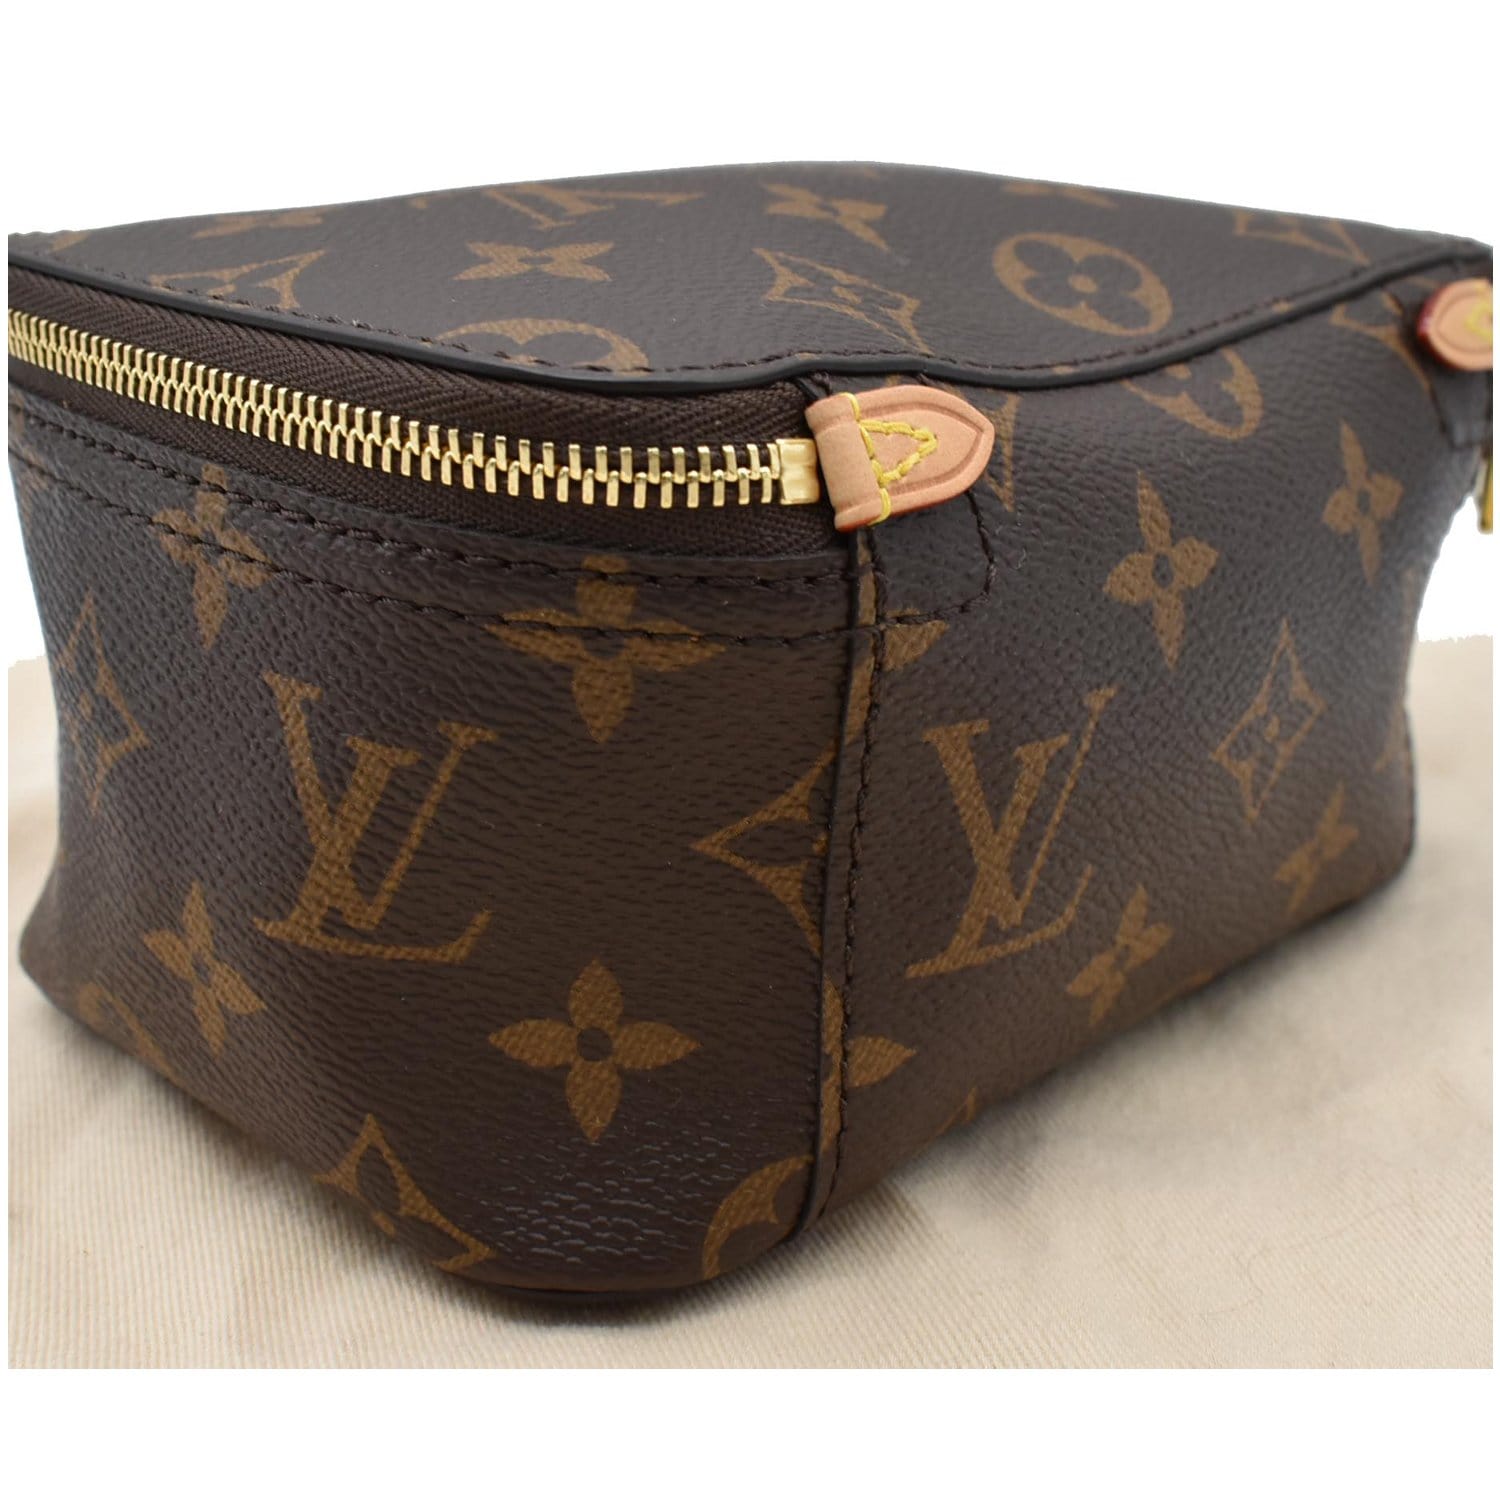 Louis Vuitton medium box, shopping bag and dust cover “NEW” for